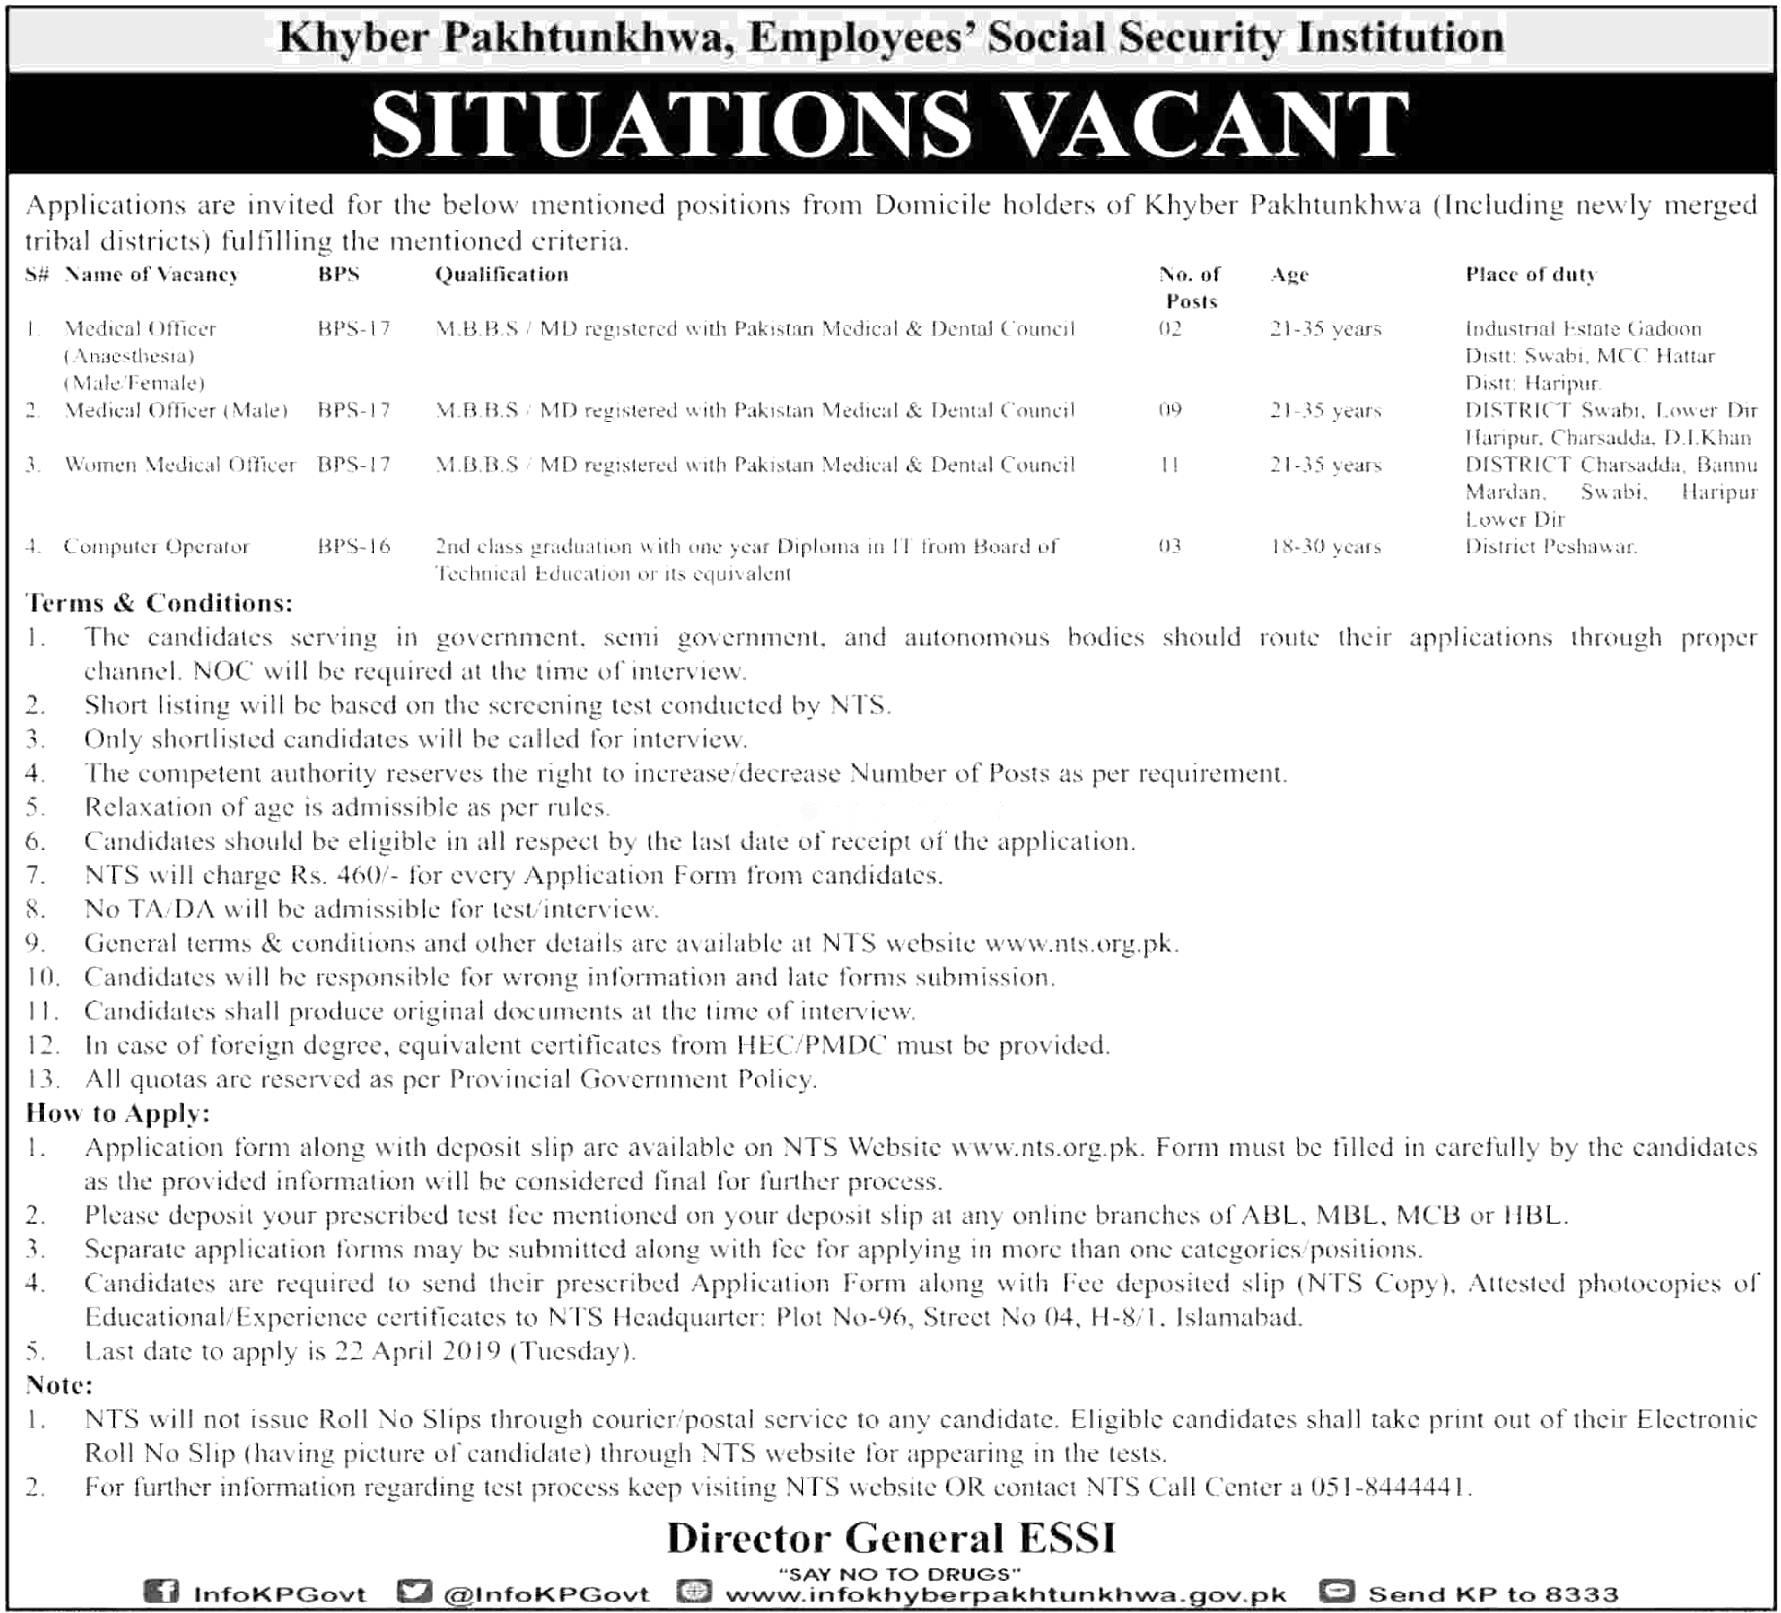 KPK Employees Social Security Institution NTS Jobs 2019 Application Form Roll No Slips